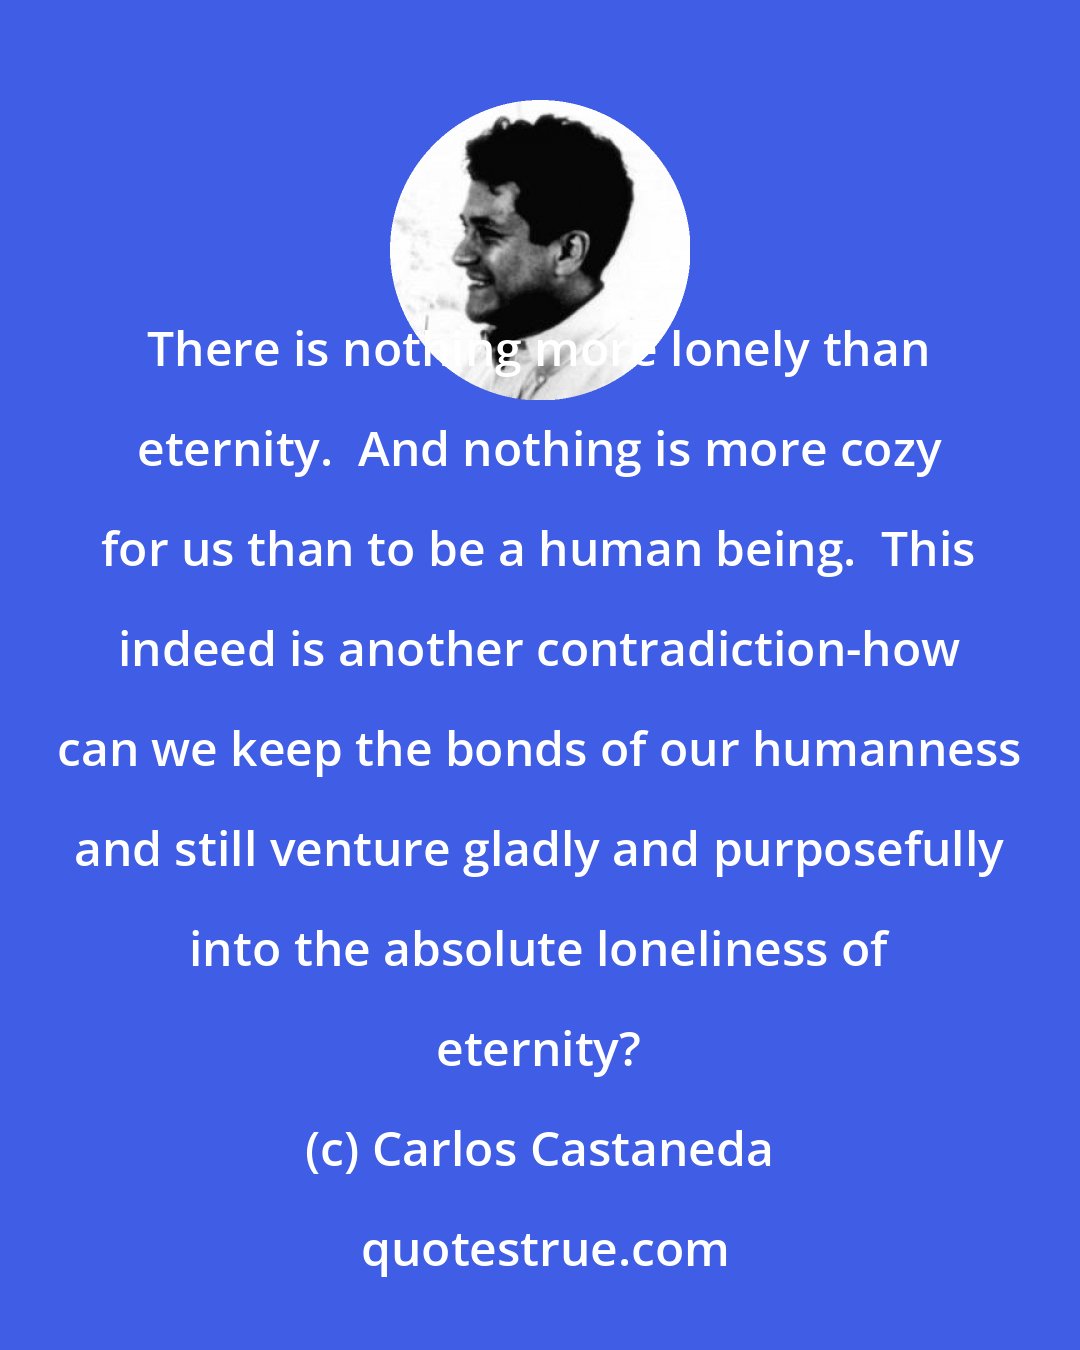 Carlos Castaneda: There is nothing more lonely than eternity.  And nothing is more cozy for us than to be a human being.  This indeed is another contradiction-how can we keep the bonds of our humanness and still venture gladly and purposefully into the absolute loneliness of eternity?